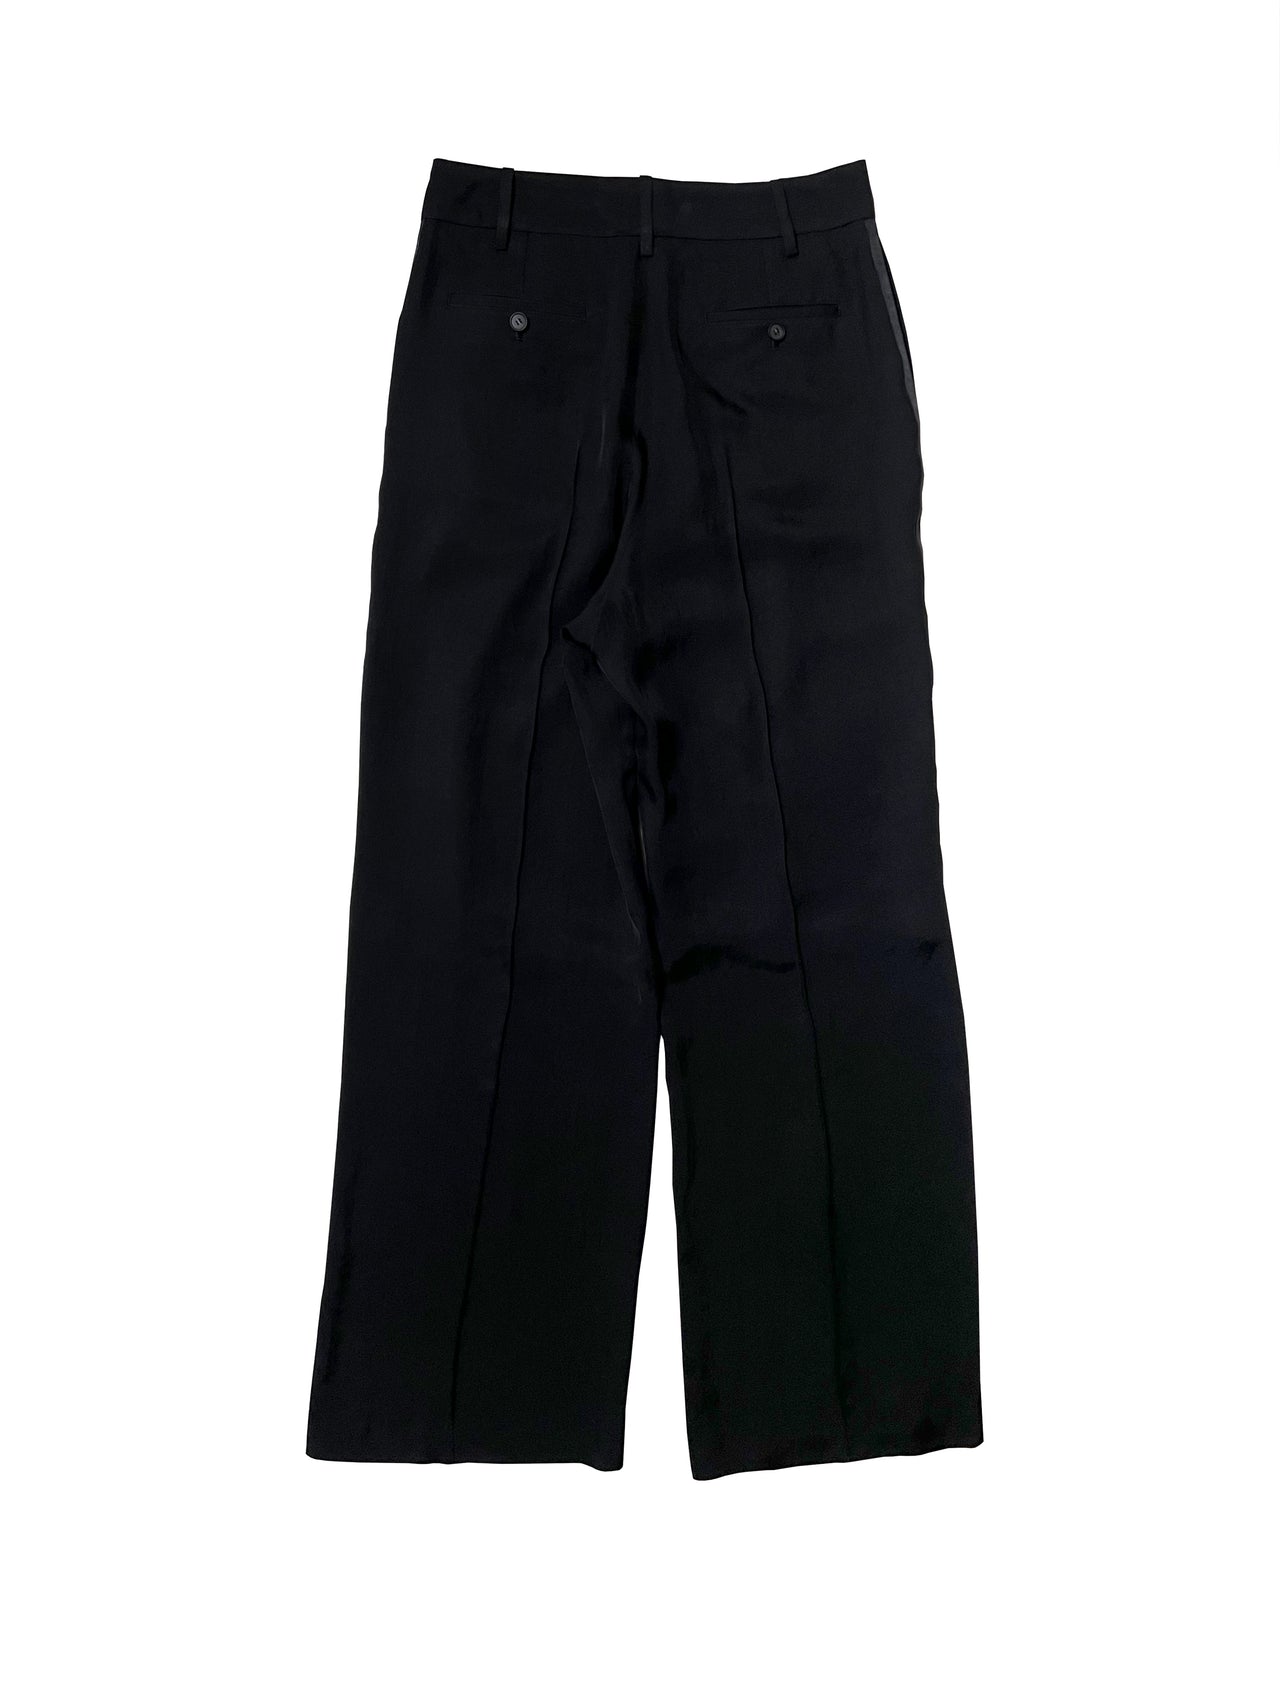 RHODES RELAX TROUSERS in BLACK